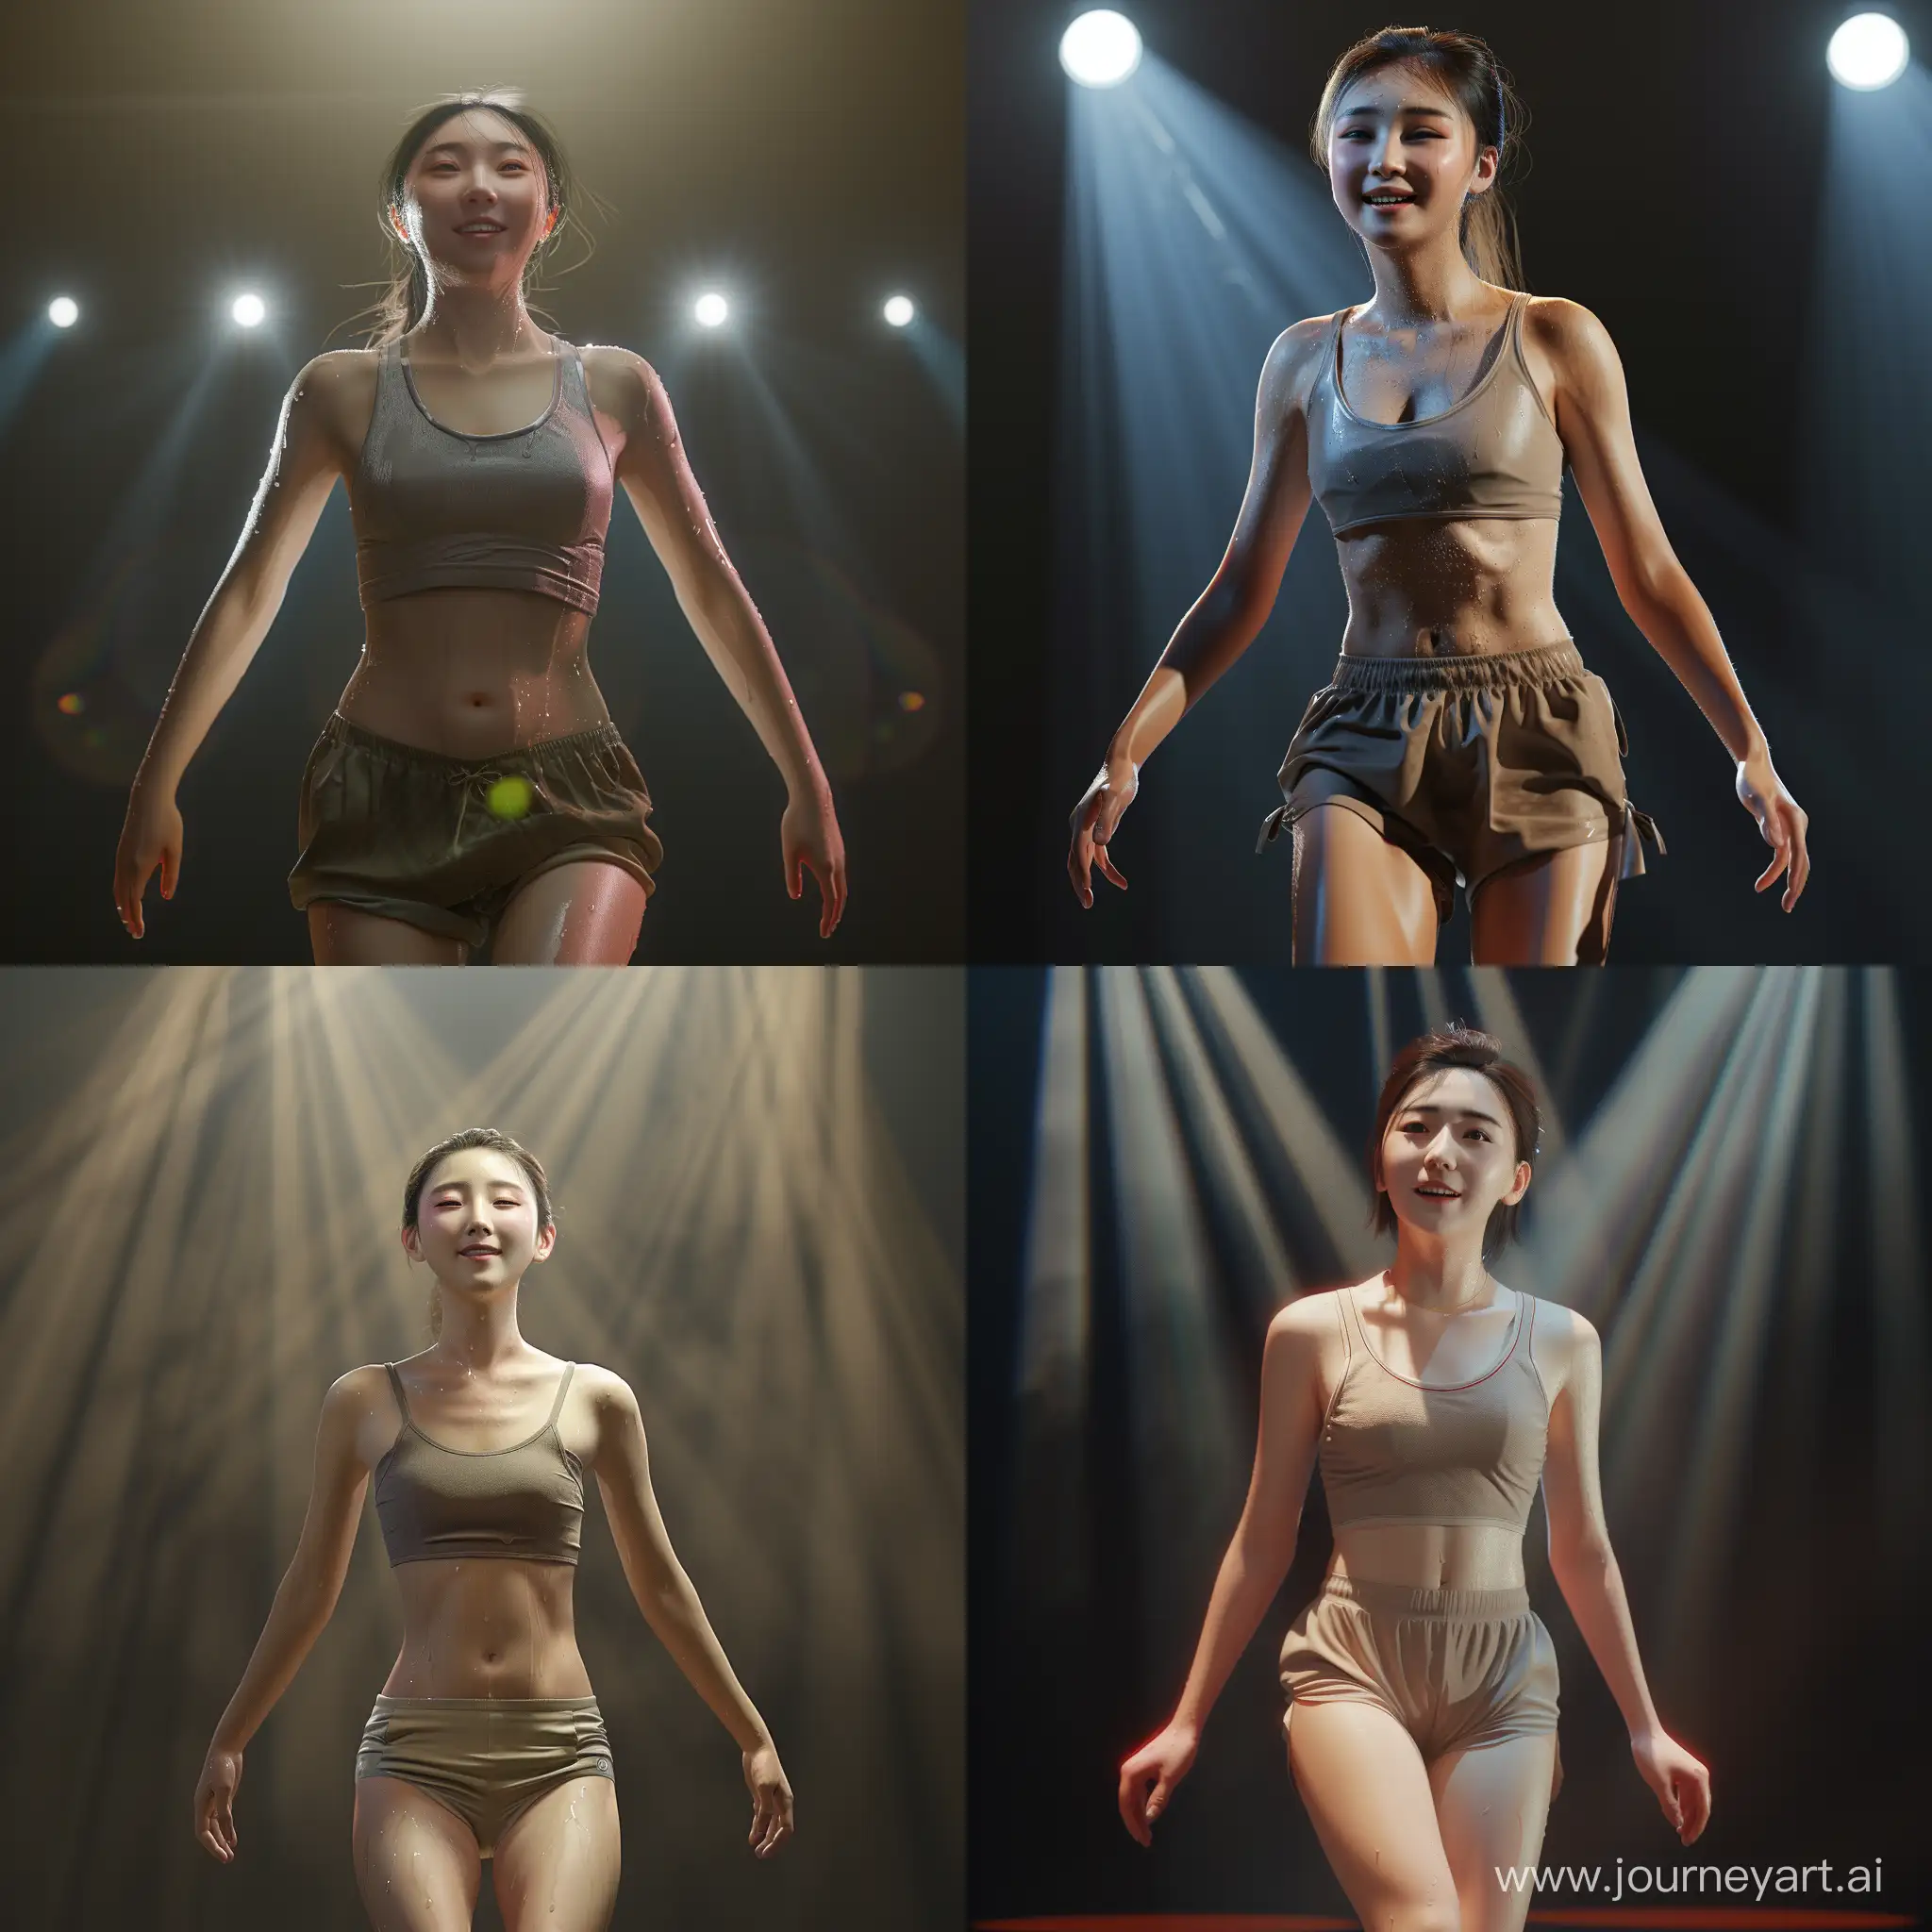 HyperRealistic-Portrait-of-Smiling-Chinese-Dancer-in-Sleeveless-Tank-Top-and-Shorts